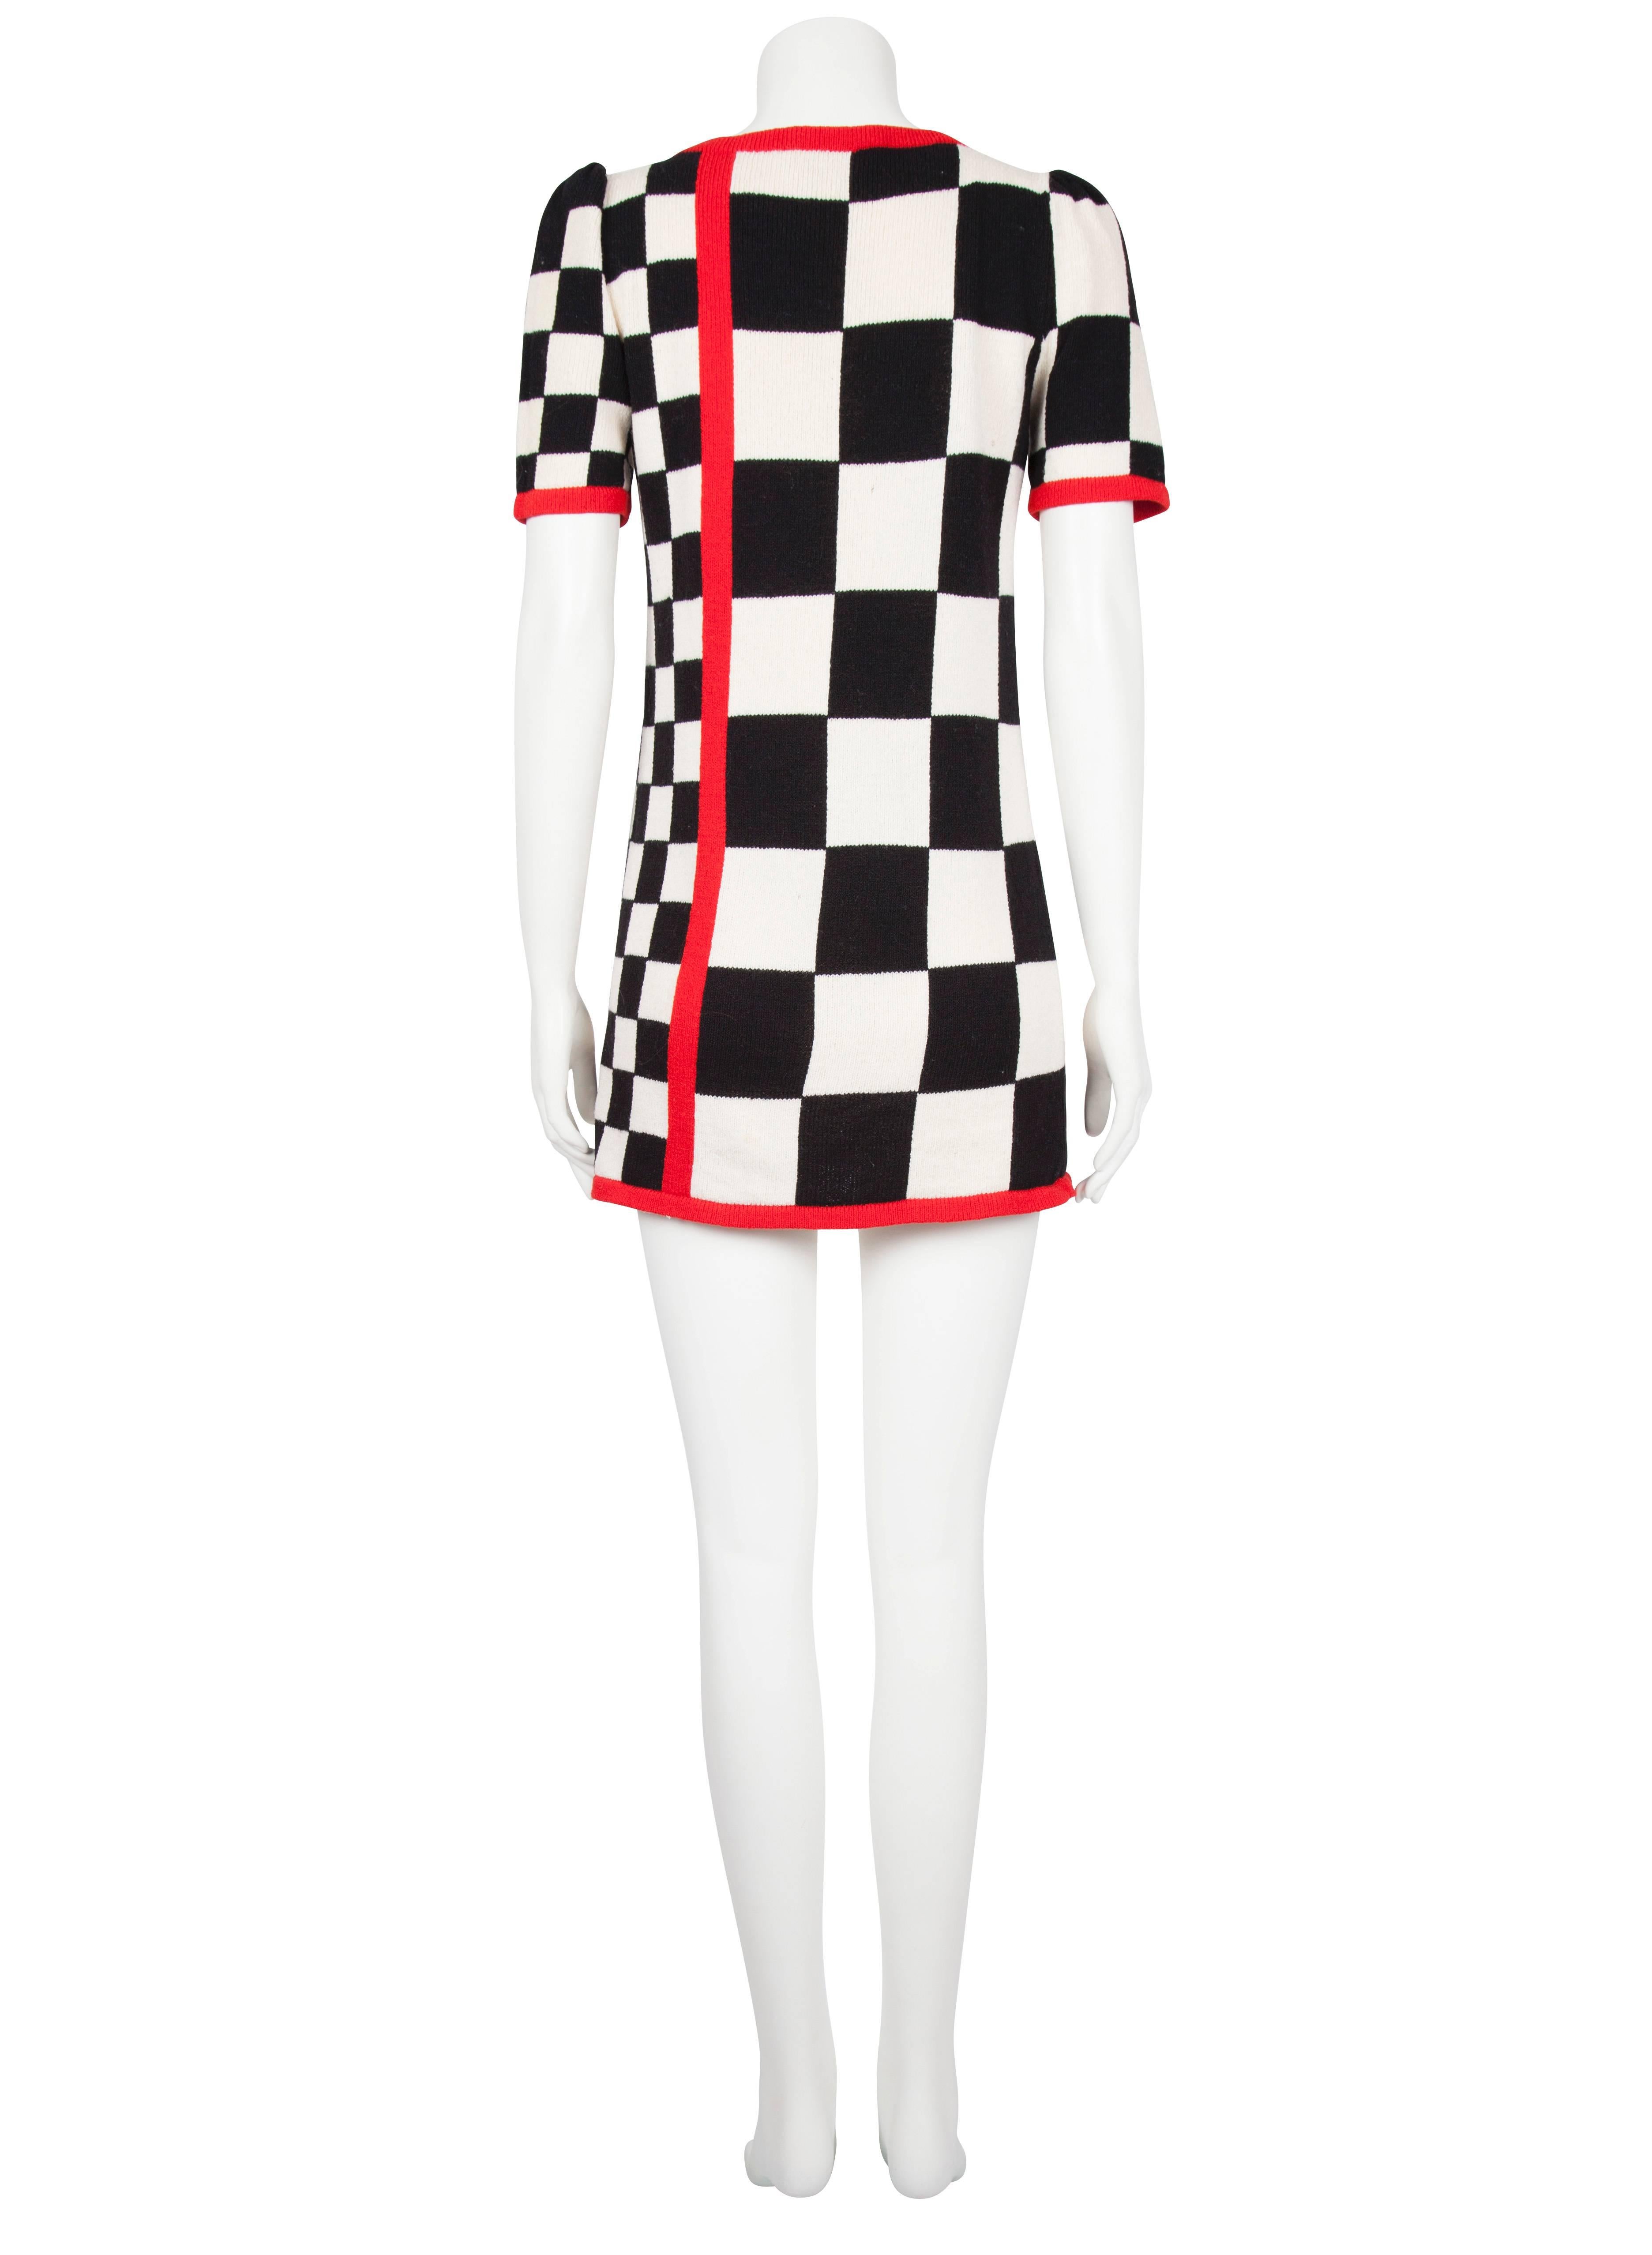 A 1980s Raul Blanco knitted mini dress featuring an all over racing flag pattern with a striking red detailing on the front left, cuffs and hem. The dress is a fitted shape and is unlined. Excellent vintage condition with no flaws to